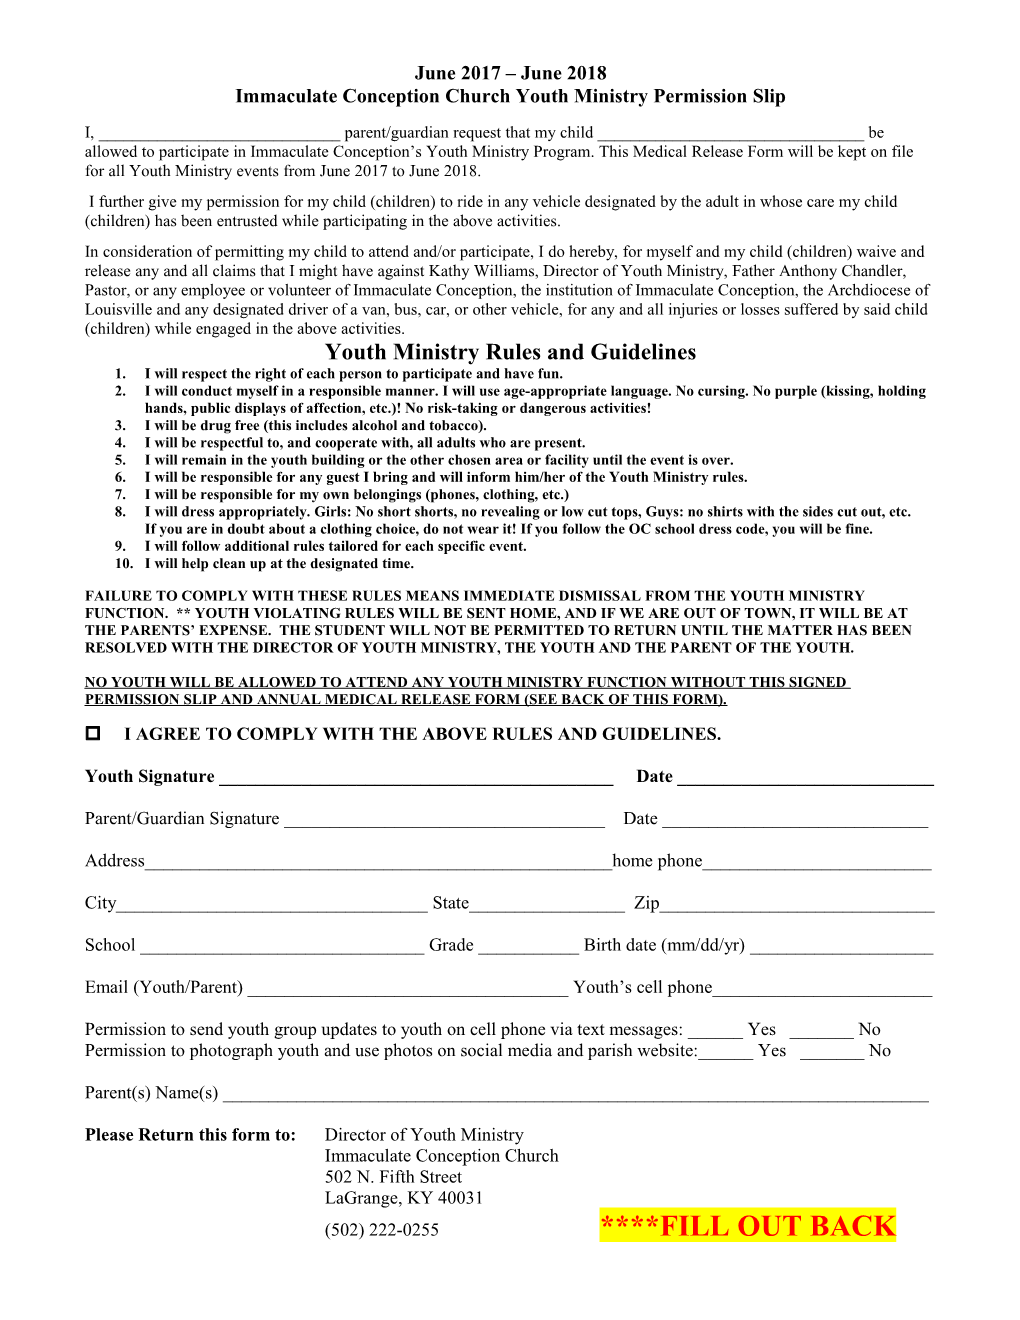 Immaculate Conception Church Youth Ministry Permission Slip